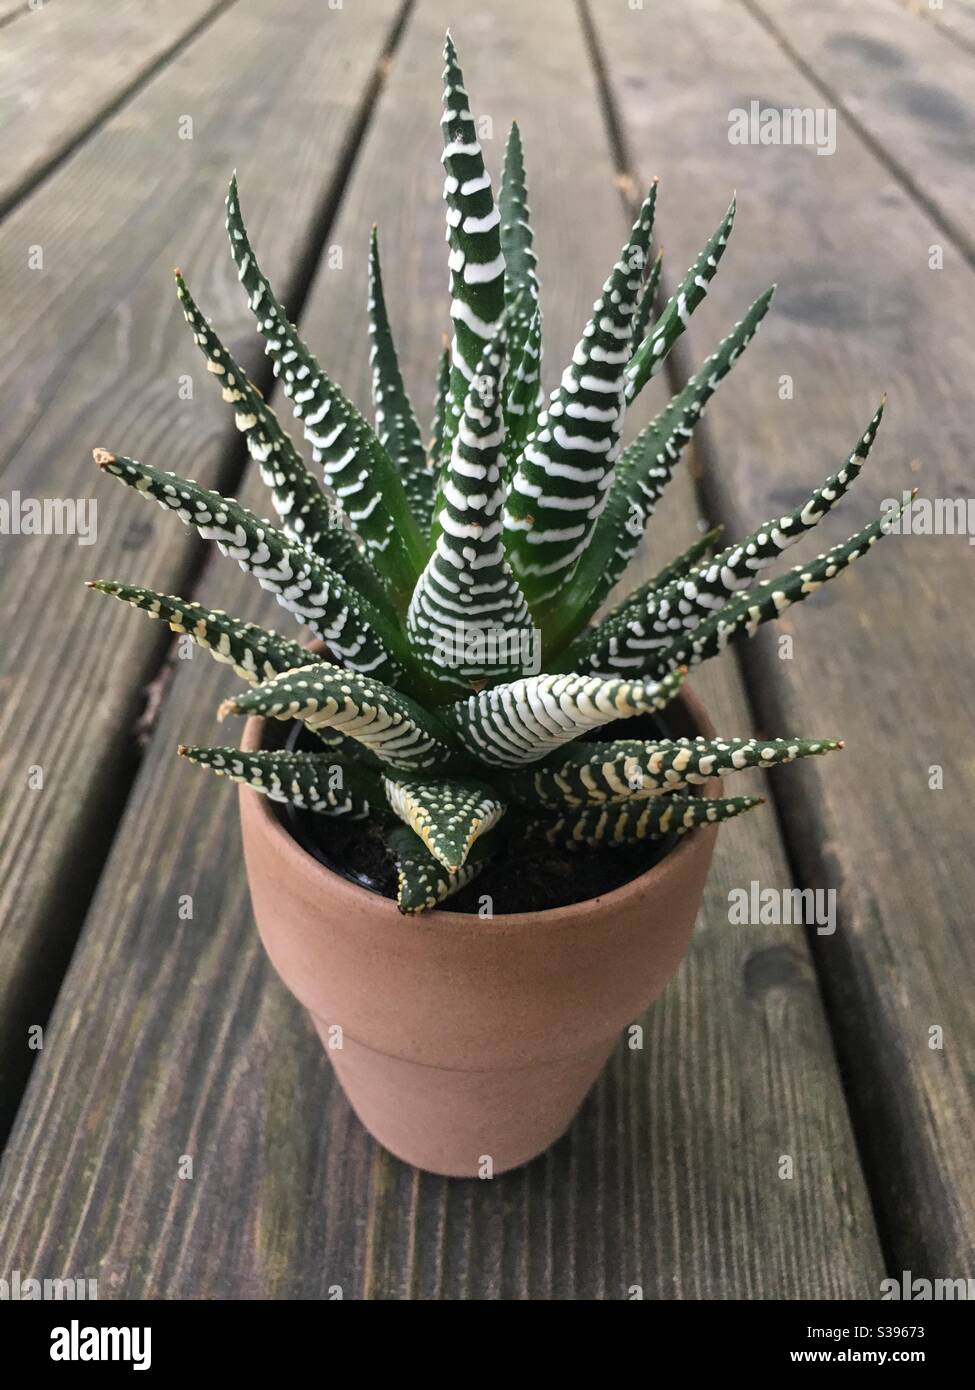 Zebra plant, an eye-catching succulent, is easy to care for. This plant is about 3 inches tall, but they can grow up to 2 feet! The scientific name is Haworthiopsis attenuata. Stock Photo